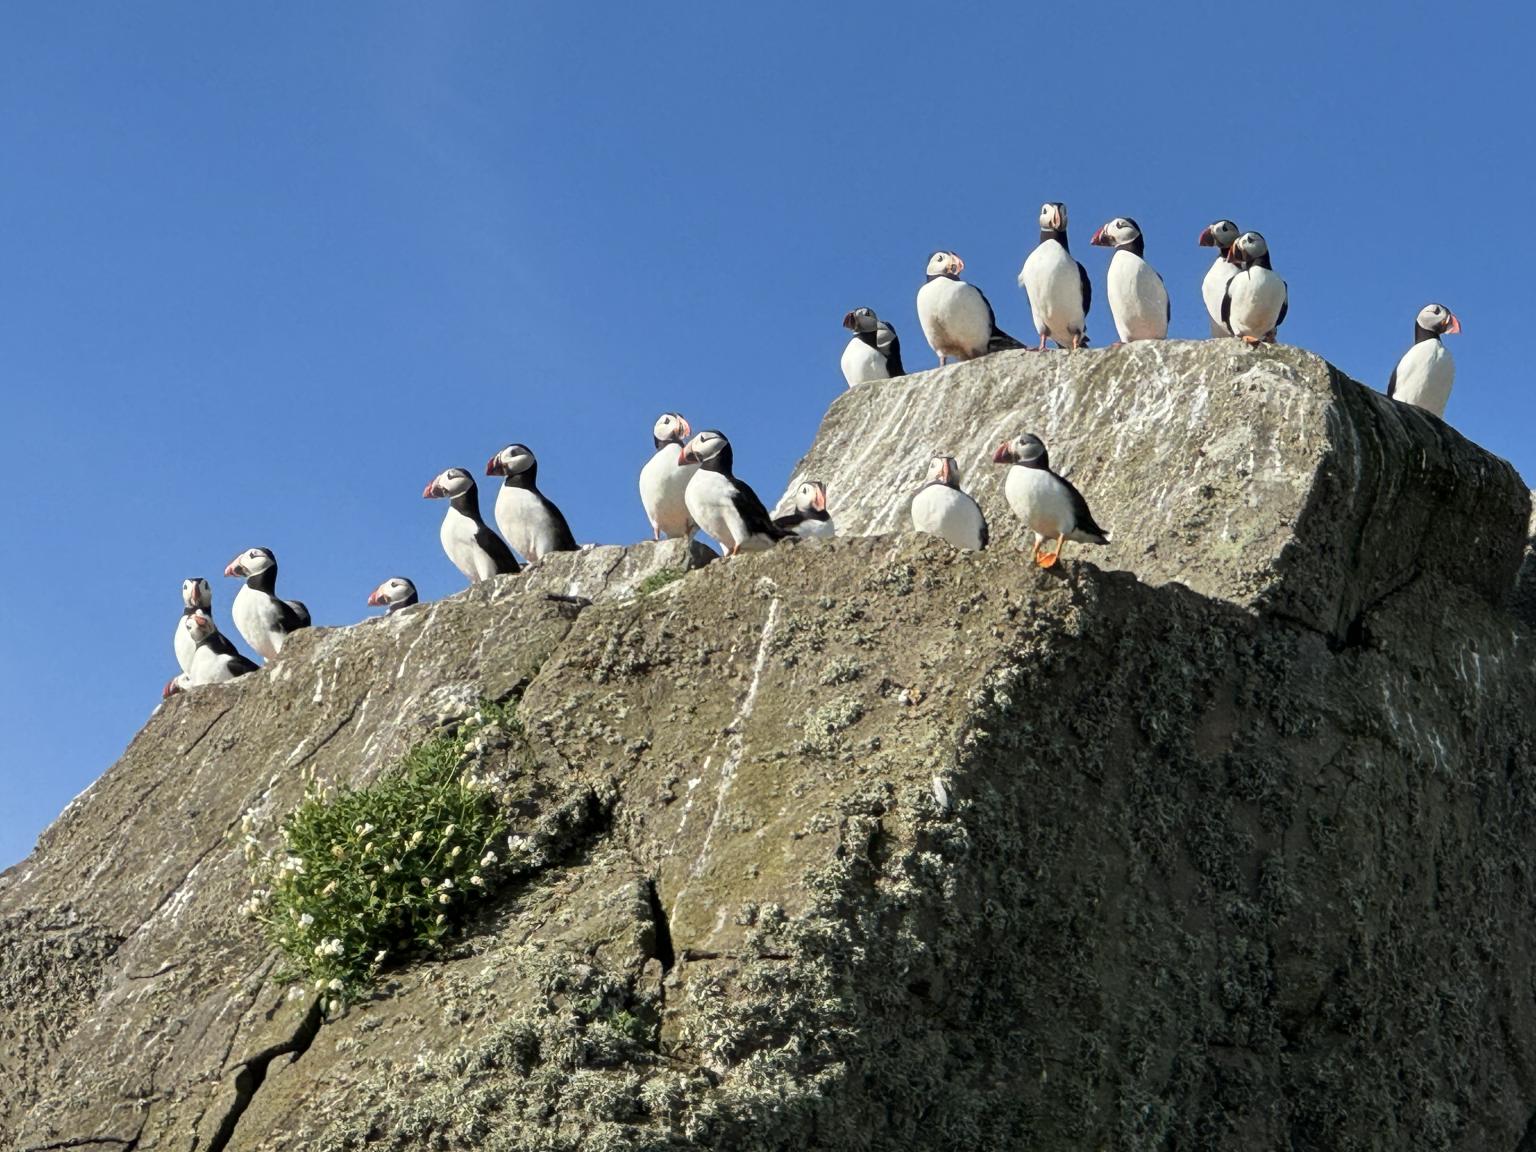 Group of puffins on a rock